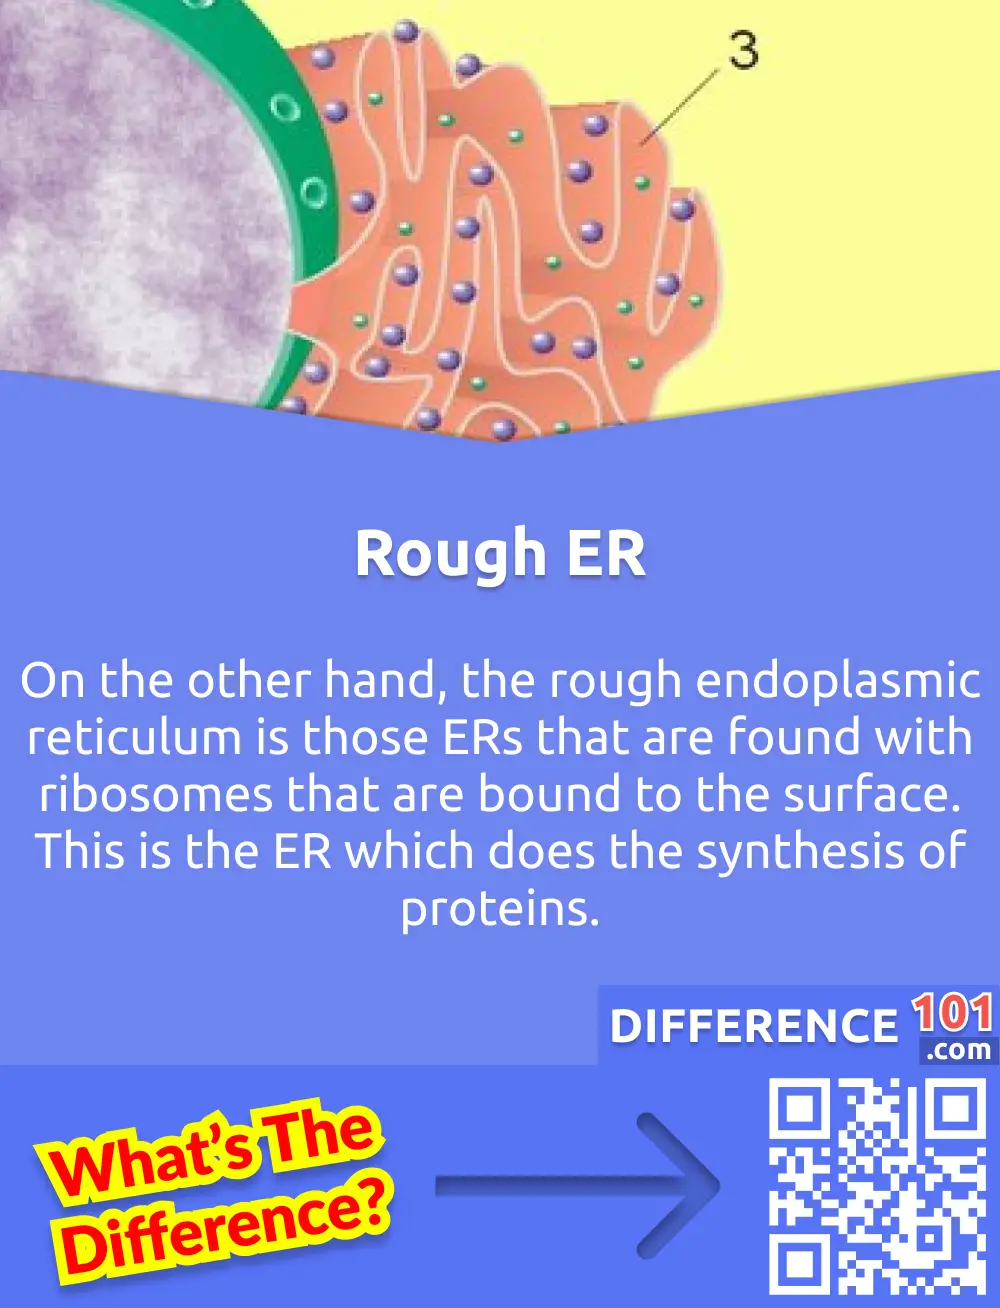 What is Rough Endoplasmic Reticulum? On the other hand, the rough endoplasmic reticulum is those ERs that are found with ribosomes that are bound to the surface. This is the ER which does the synthesis of proteins.